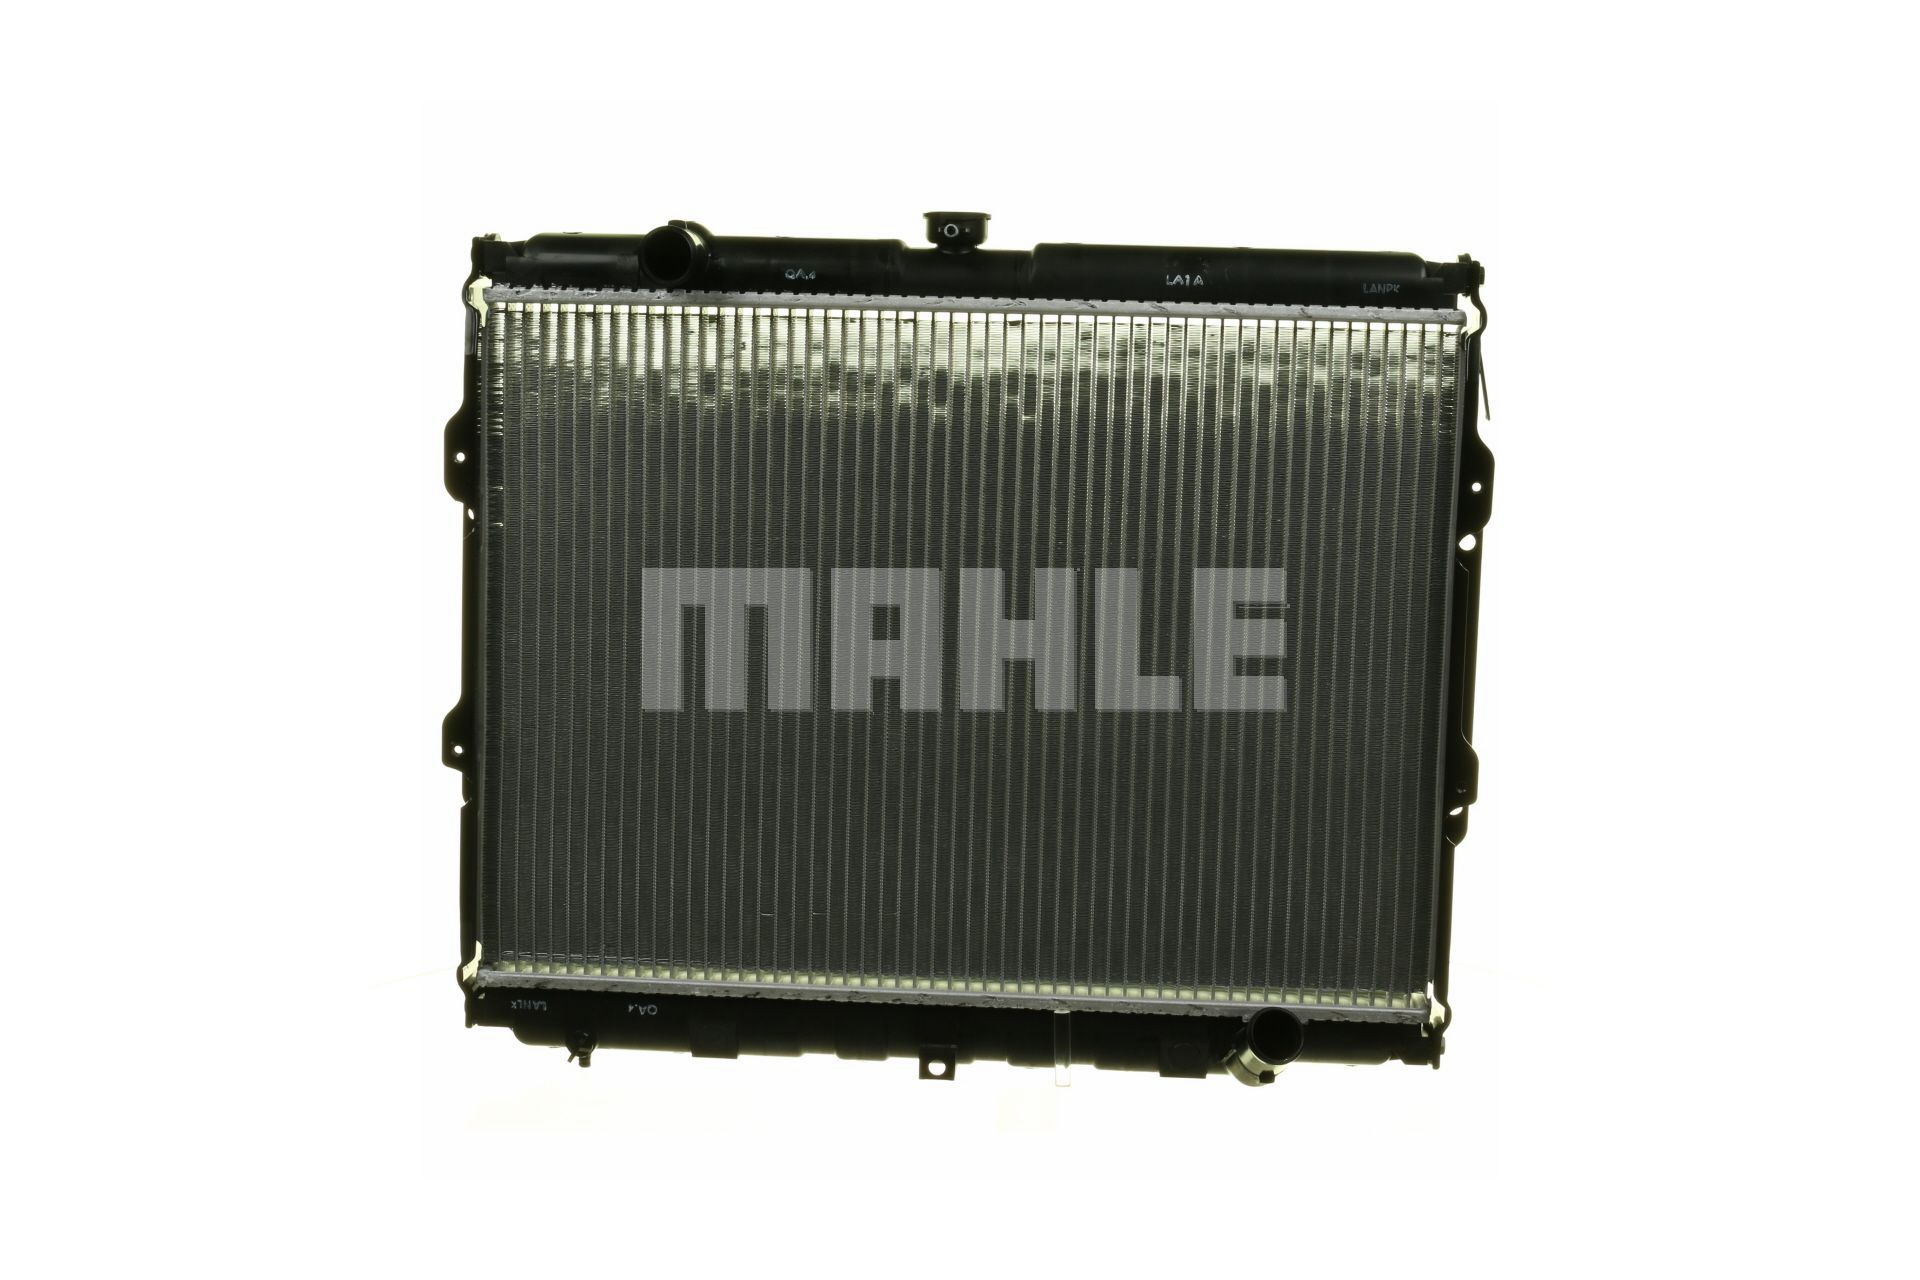 MAHLE ORIGINAL CR 1319 000P Engine radiator for vehicles with/without air conditioning, 610 x 440 x 26 mm, Manual Transmission, Brazed cooling fins